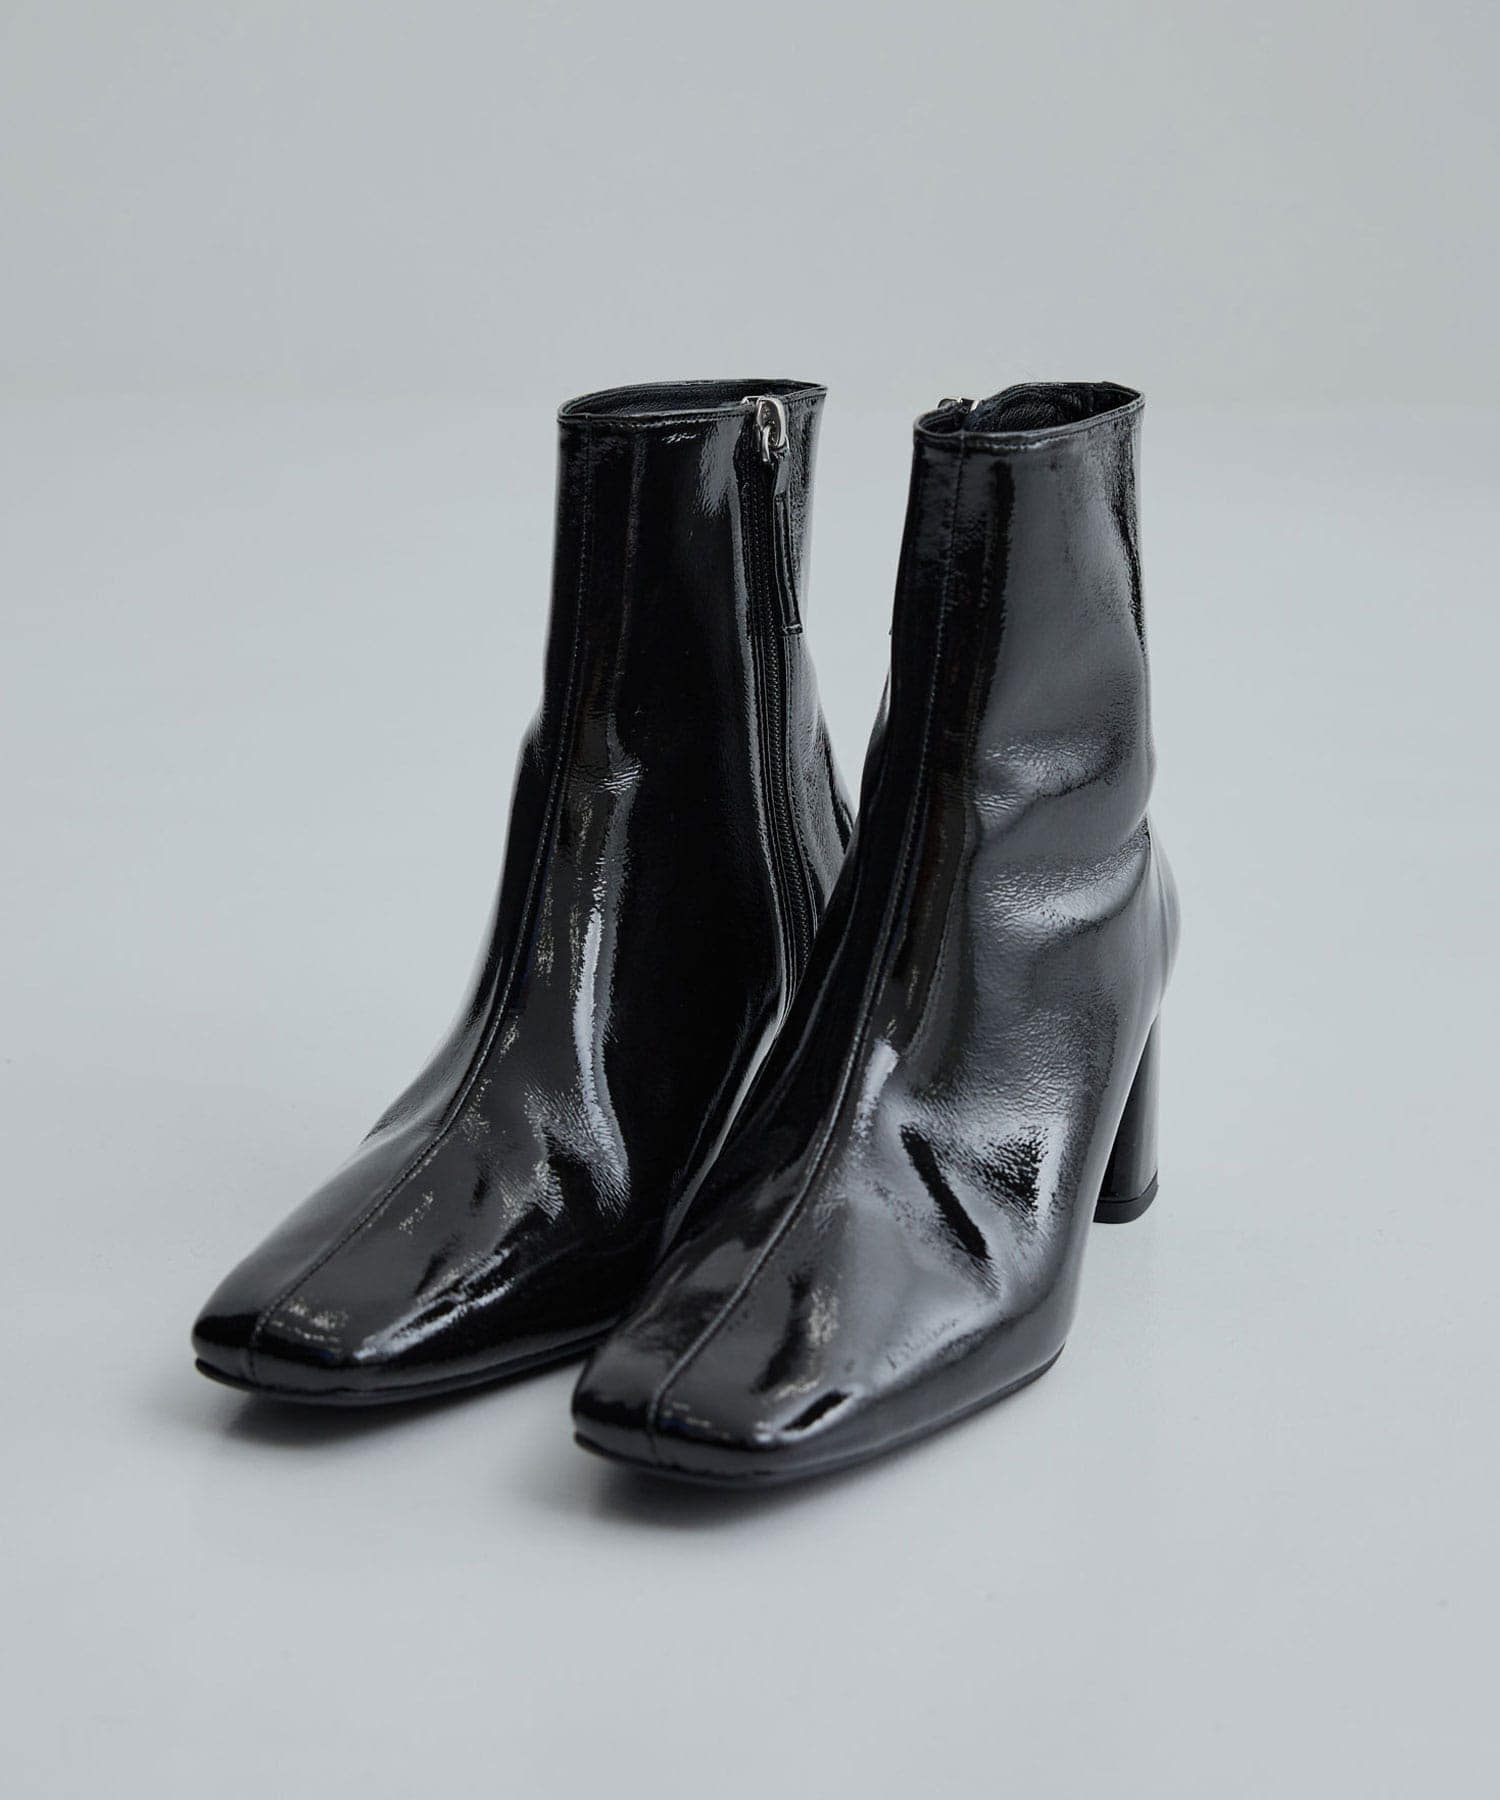 Patent leather square toe boots